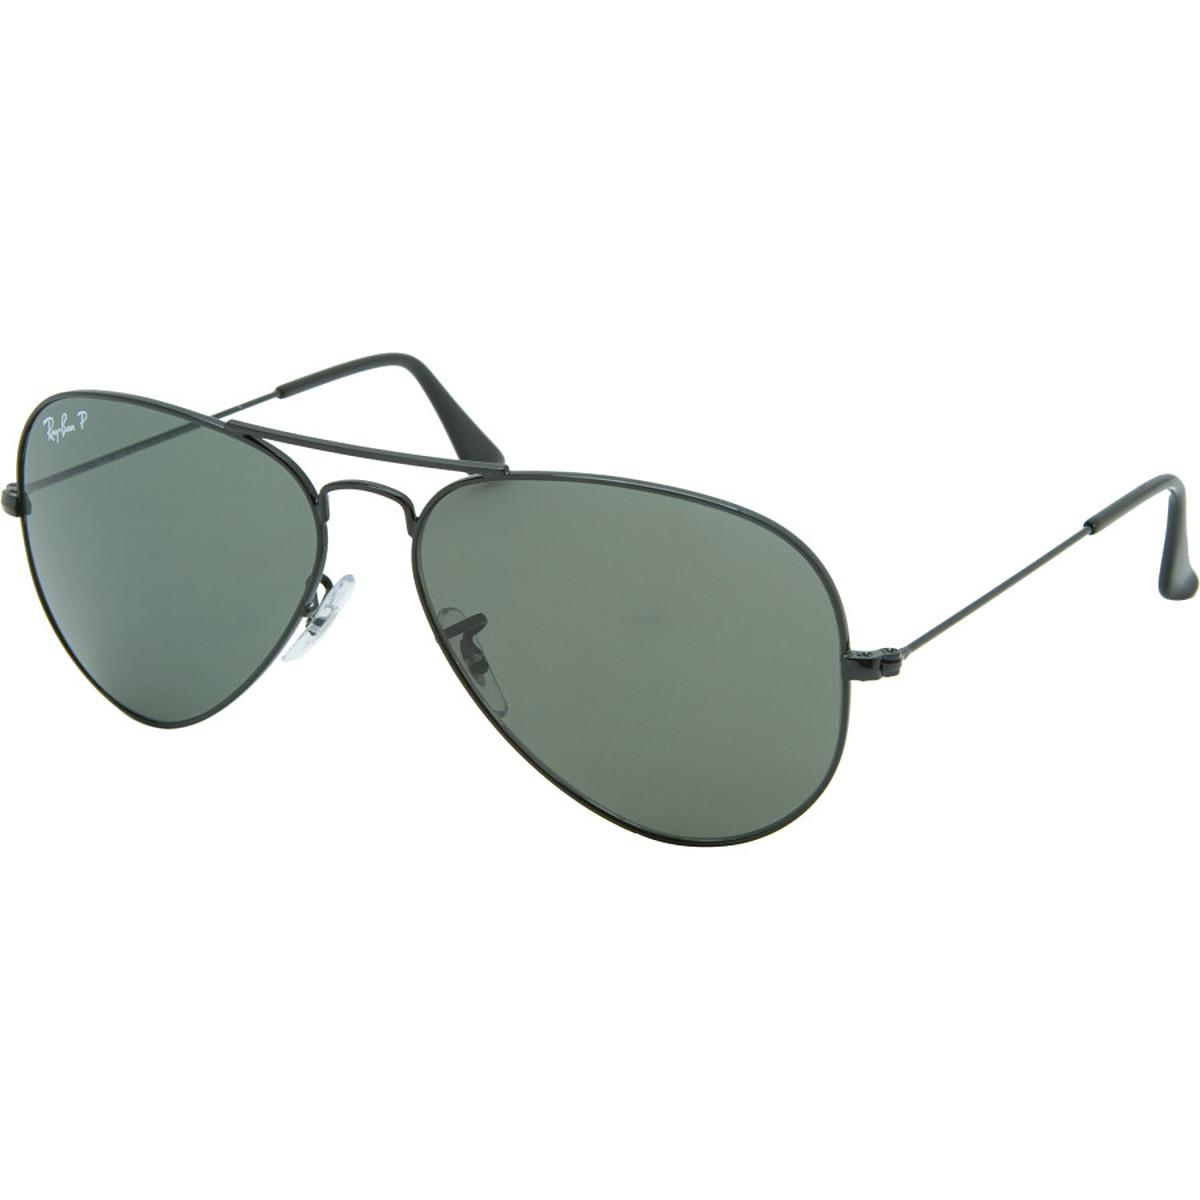 Ray Ban Aviator Large Metal Sunglasses Polarized In Green For Men Lyst